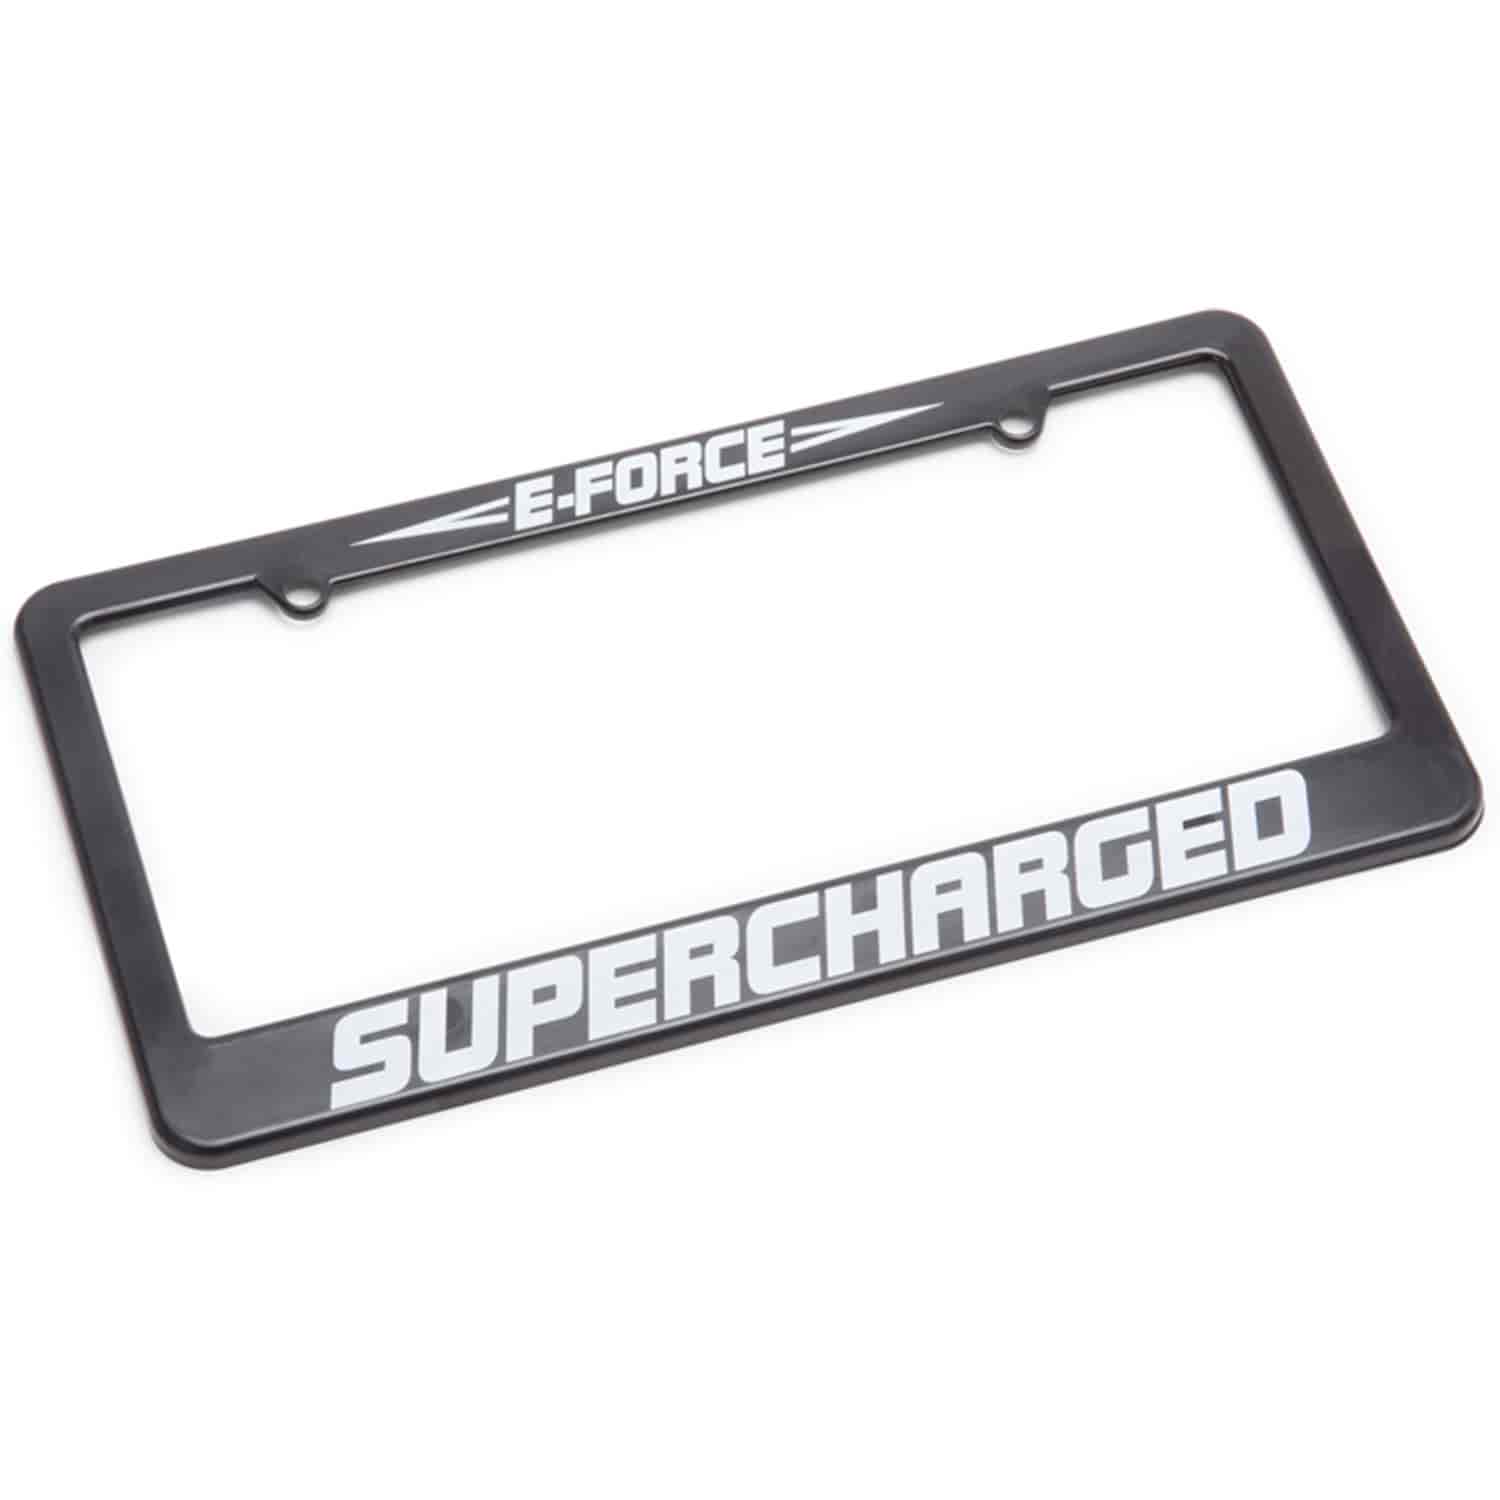 E-Force Supercharger License Plate Frame